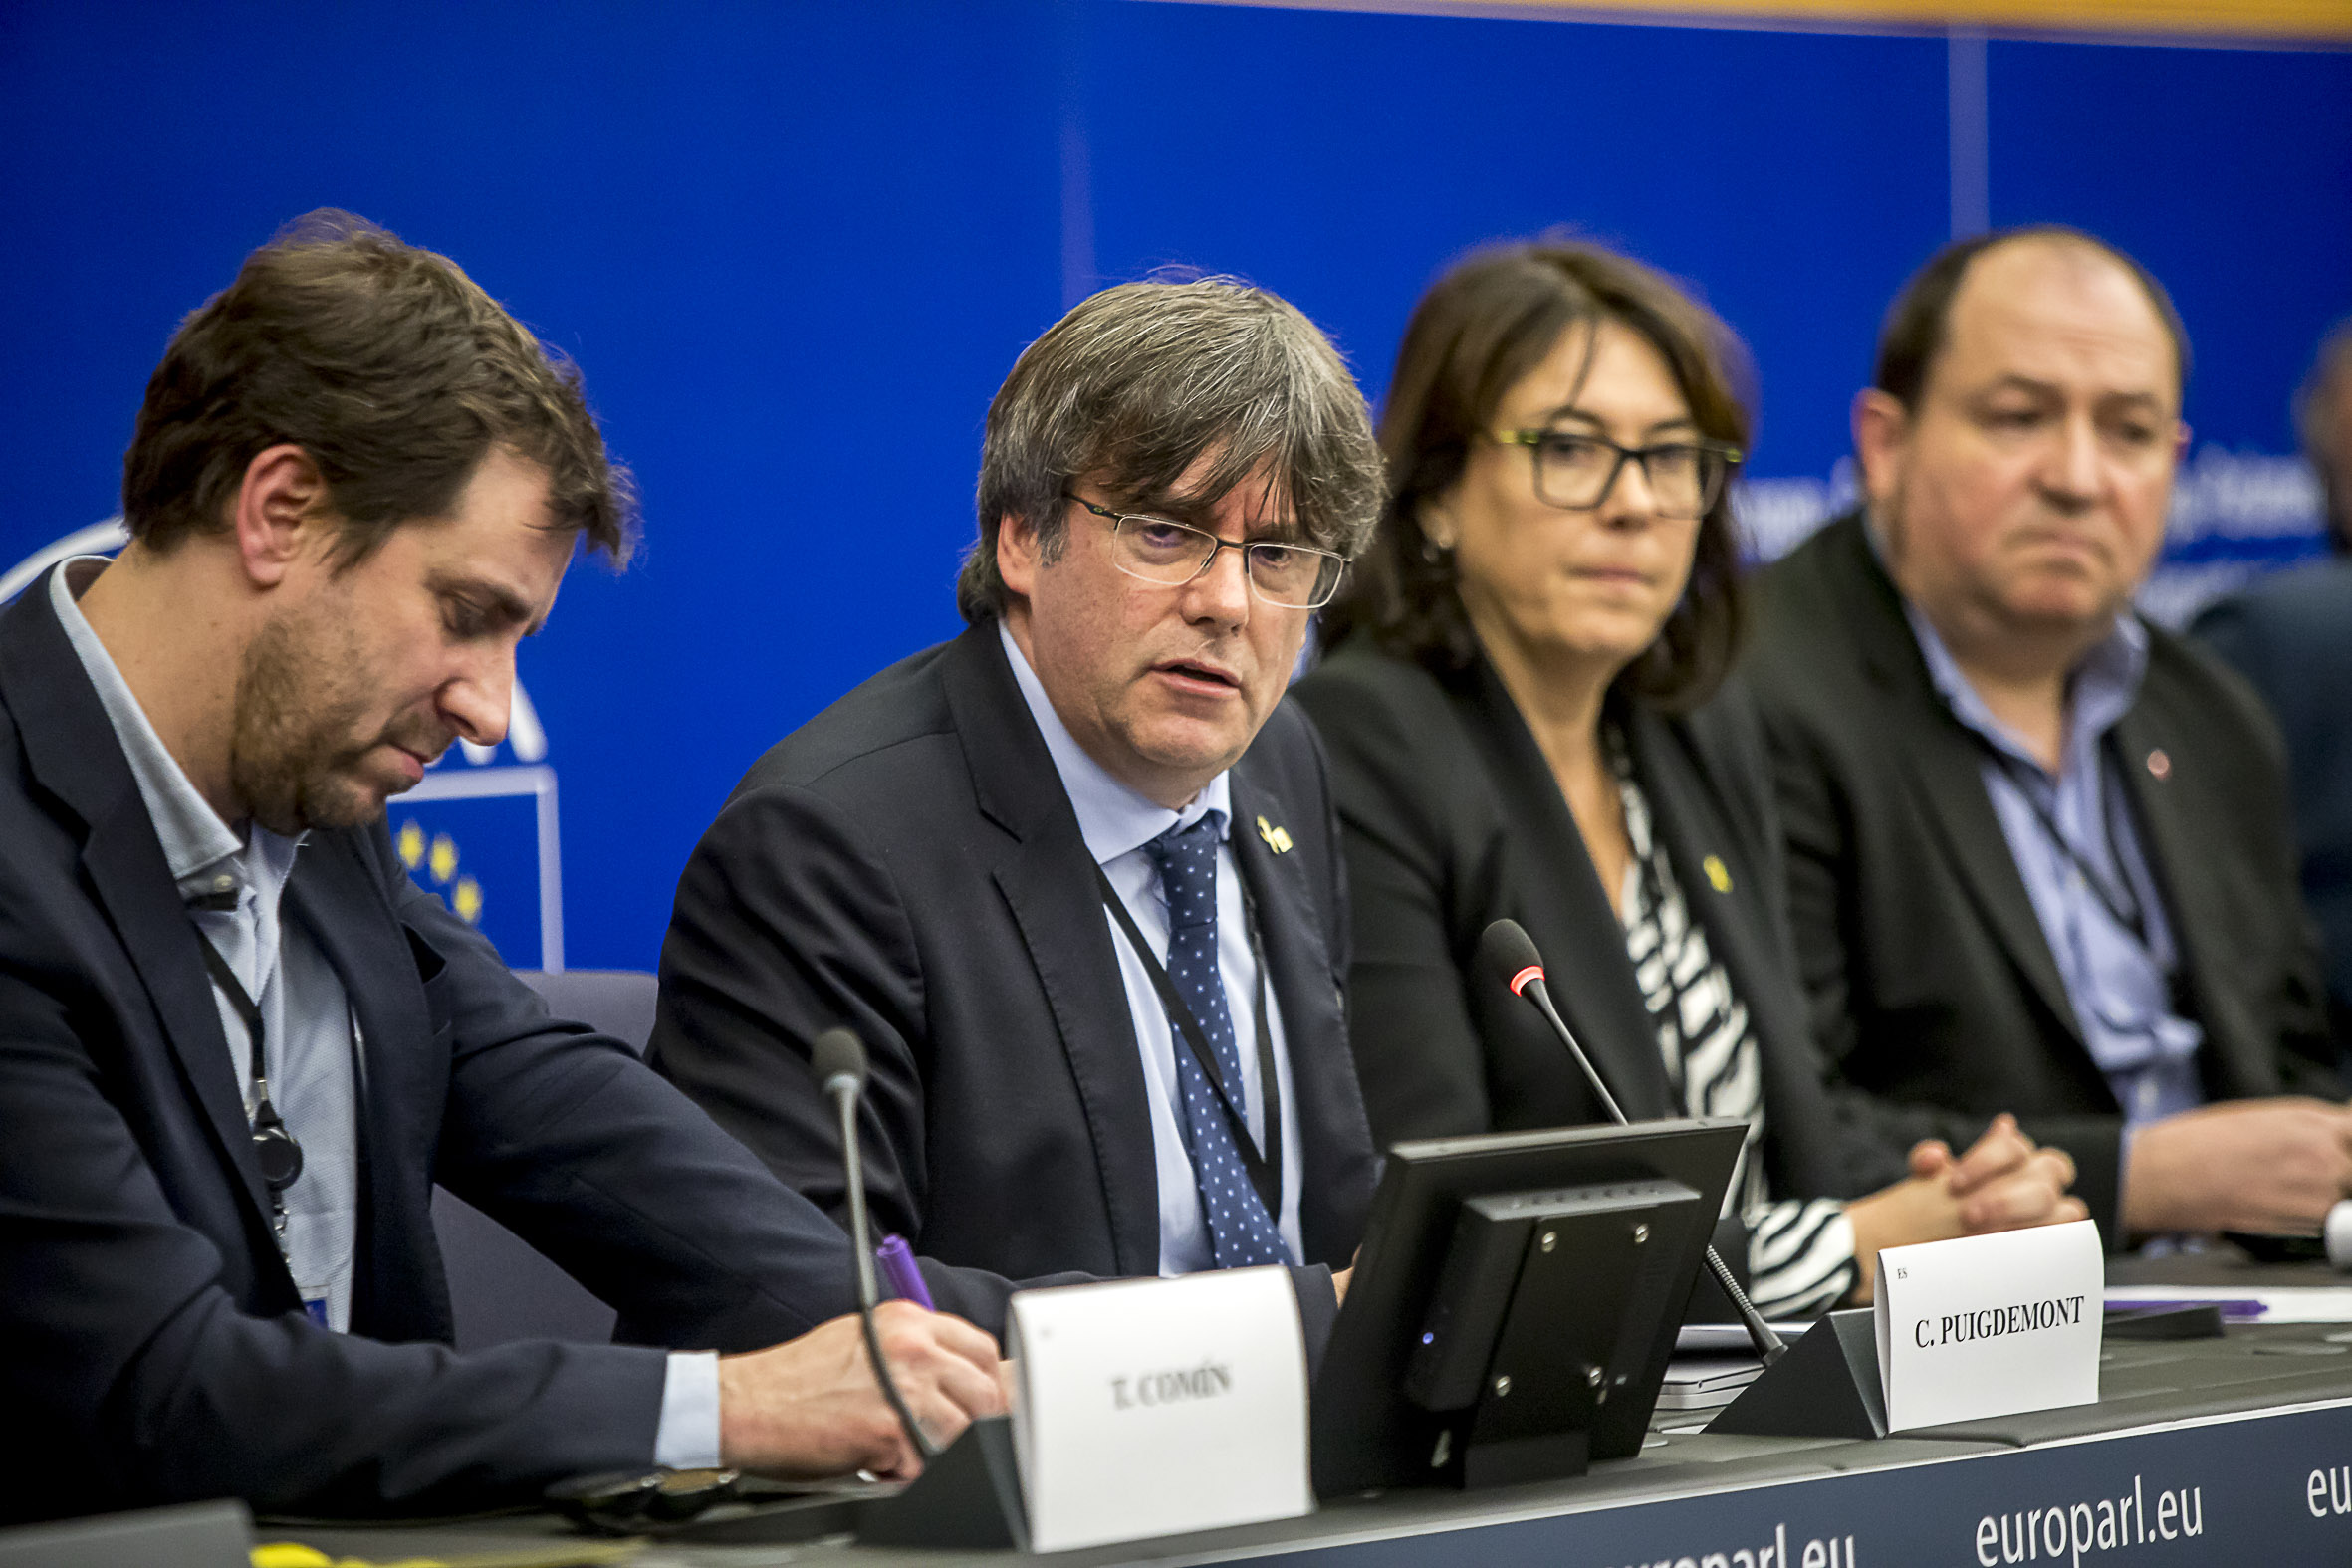 From left to right: Toni Comín, Carles Puigdemont, Diana Riba and Pernando Barrena